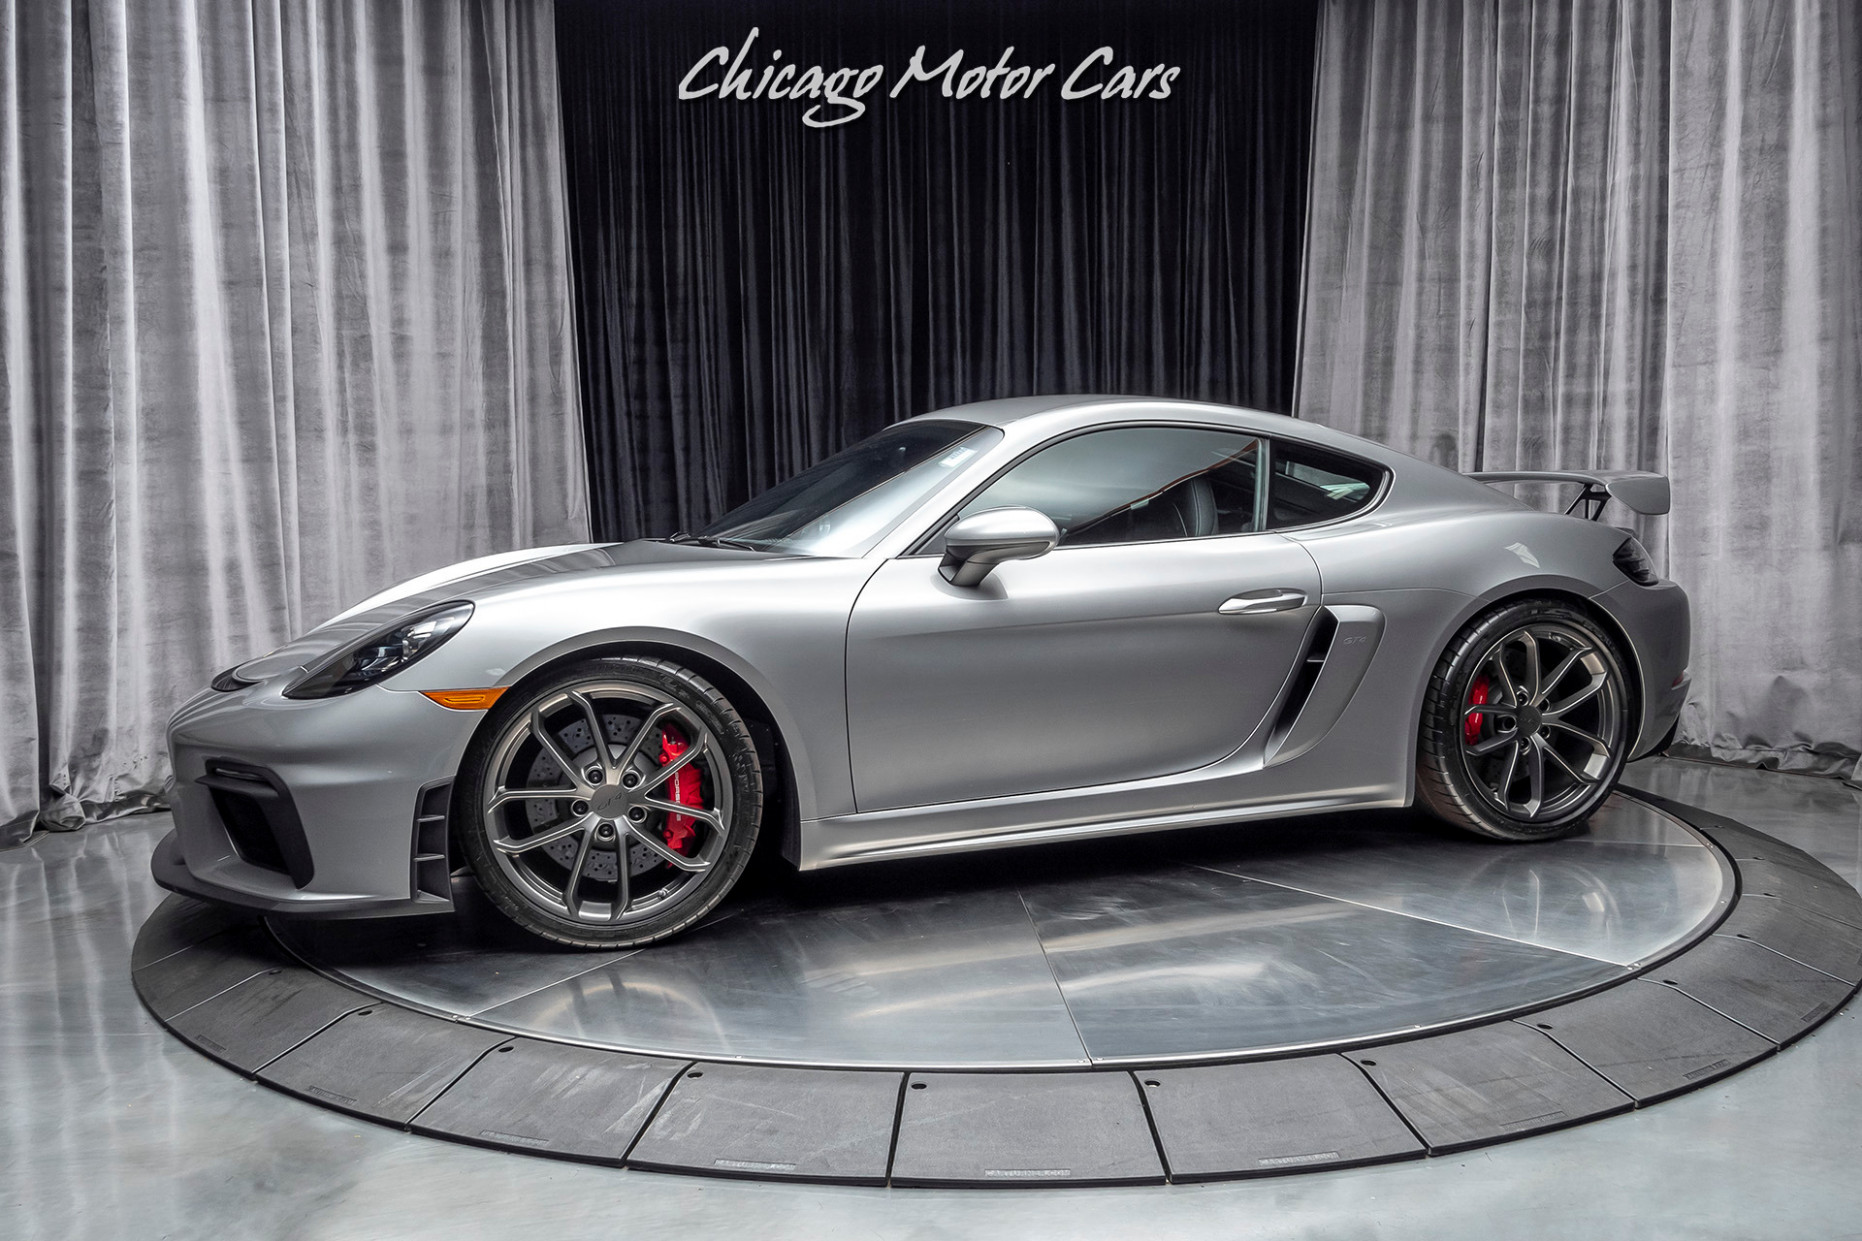 Used 5 Porsche 5 Cayman Gt5 Only 5 Miles! Manual! Brand New Porsche 718 Cayman Gt4 For Sale